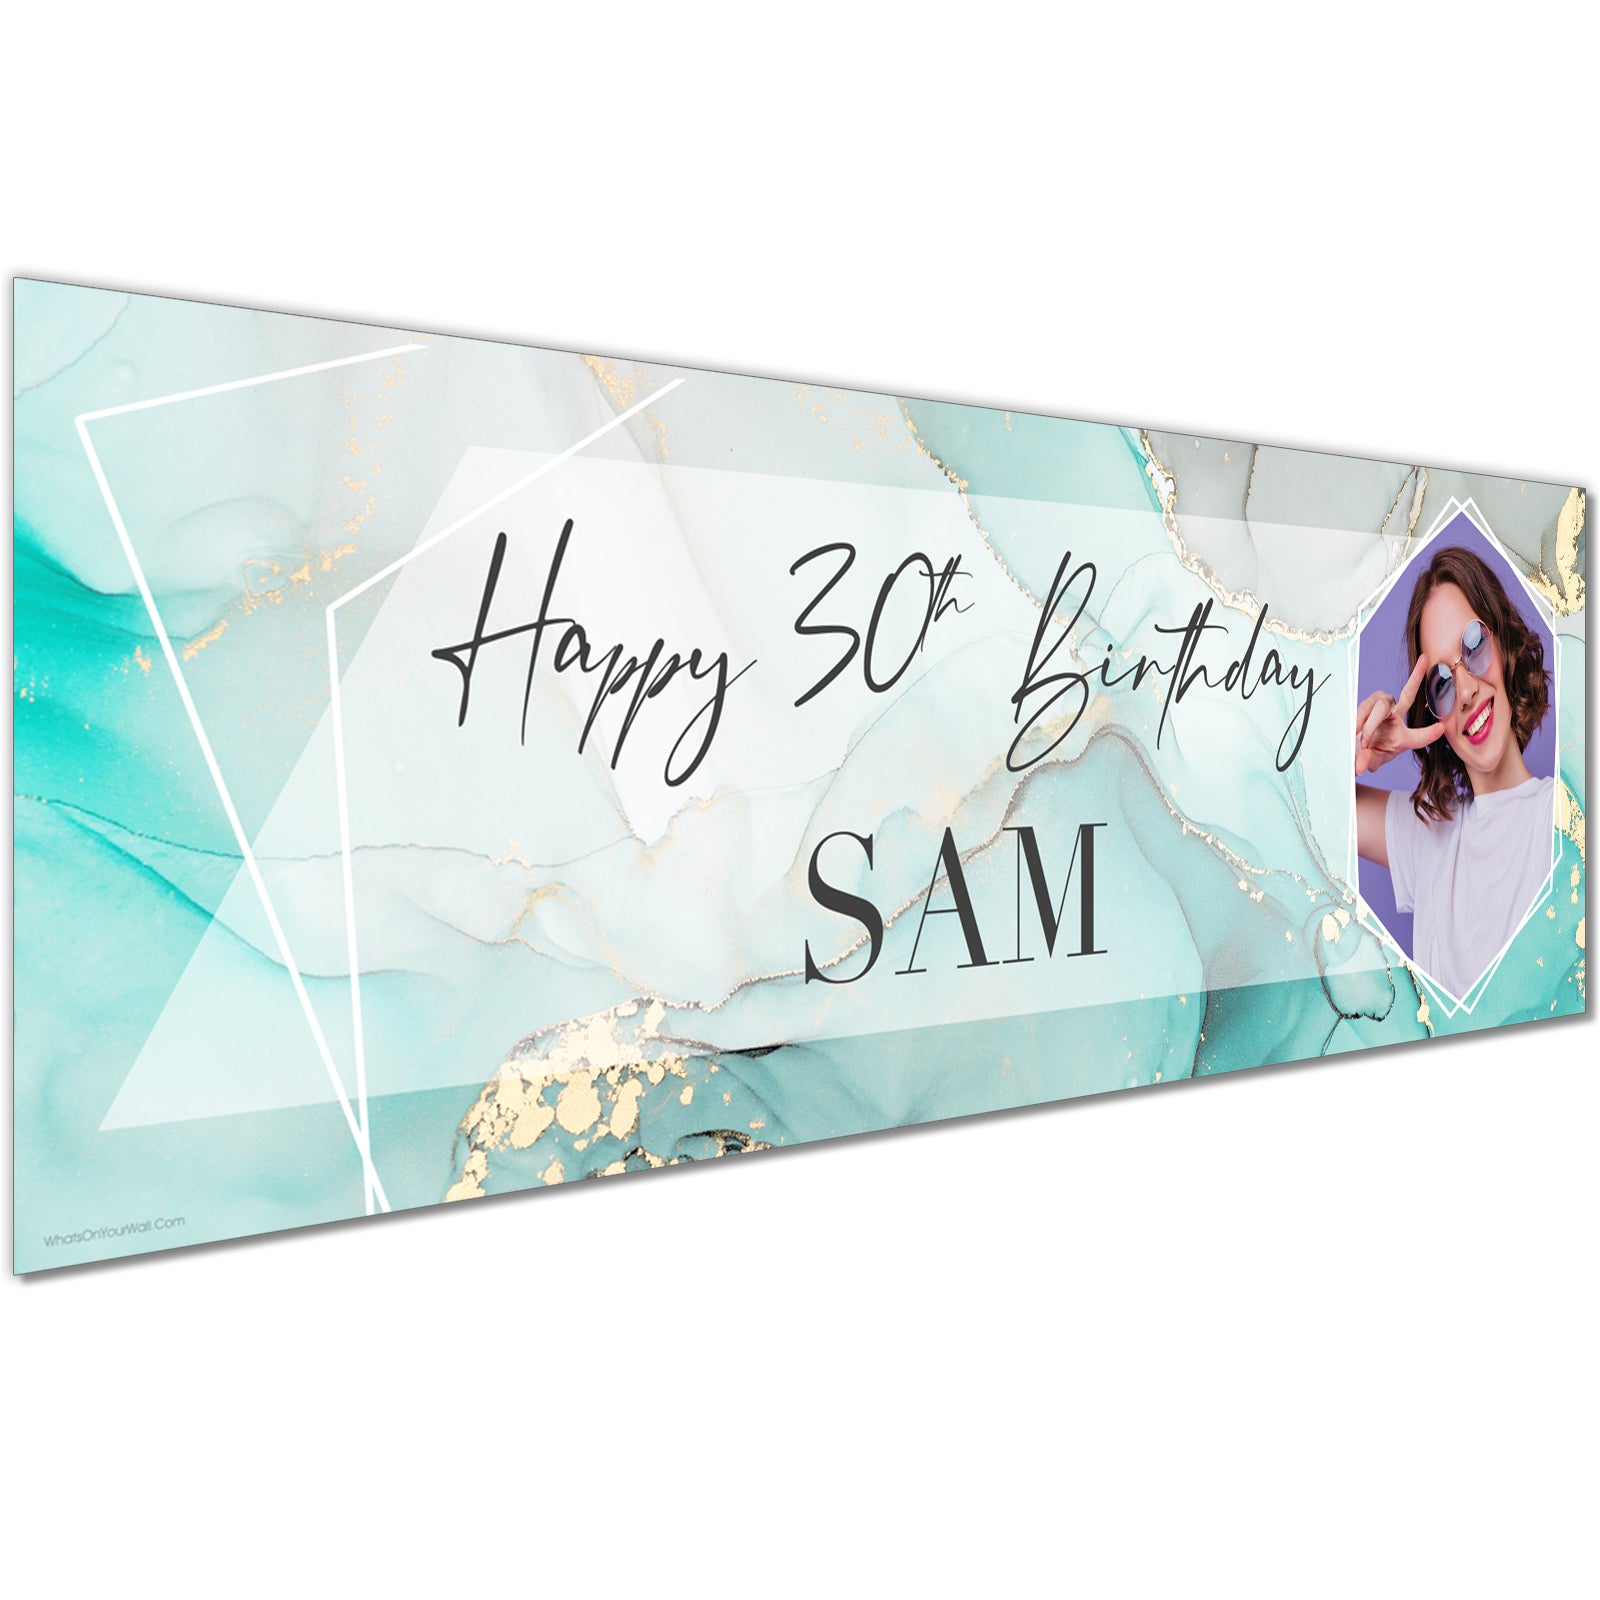 Personalised Birthday Banners in Marble Teal Gold Design